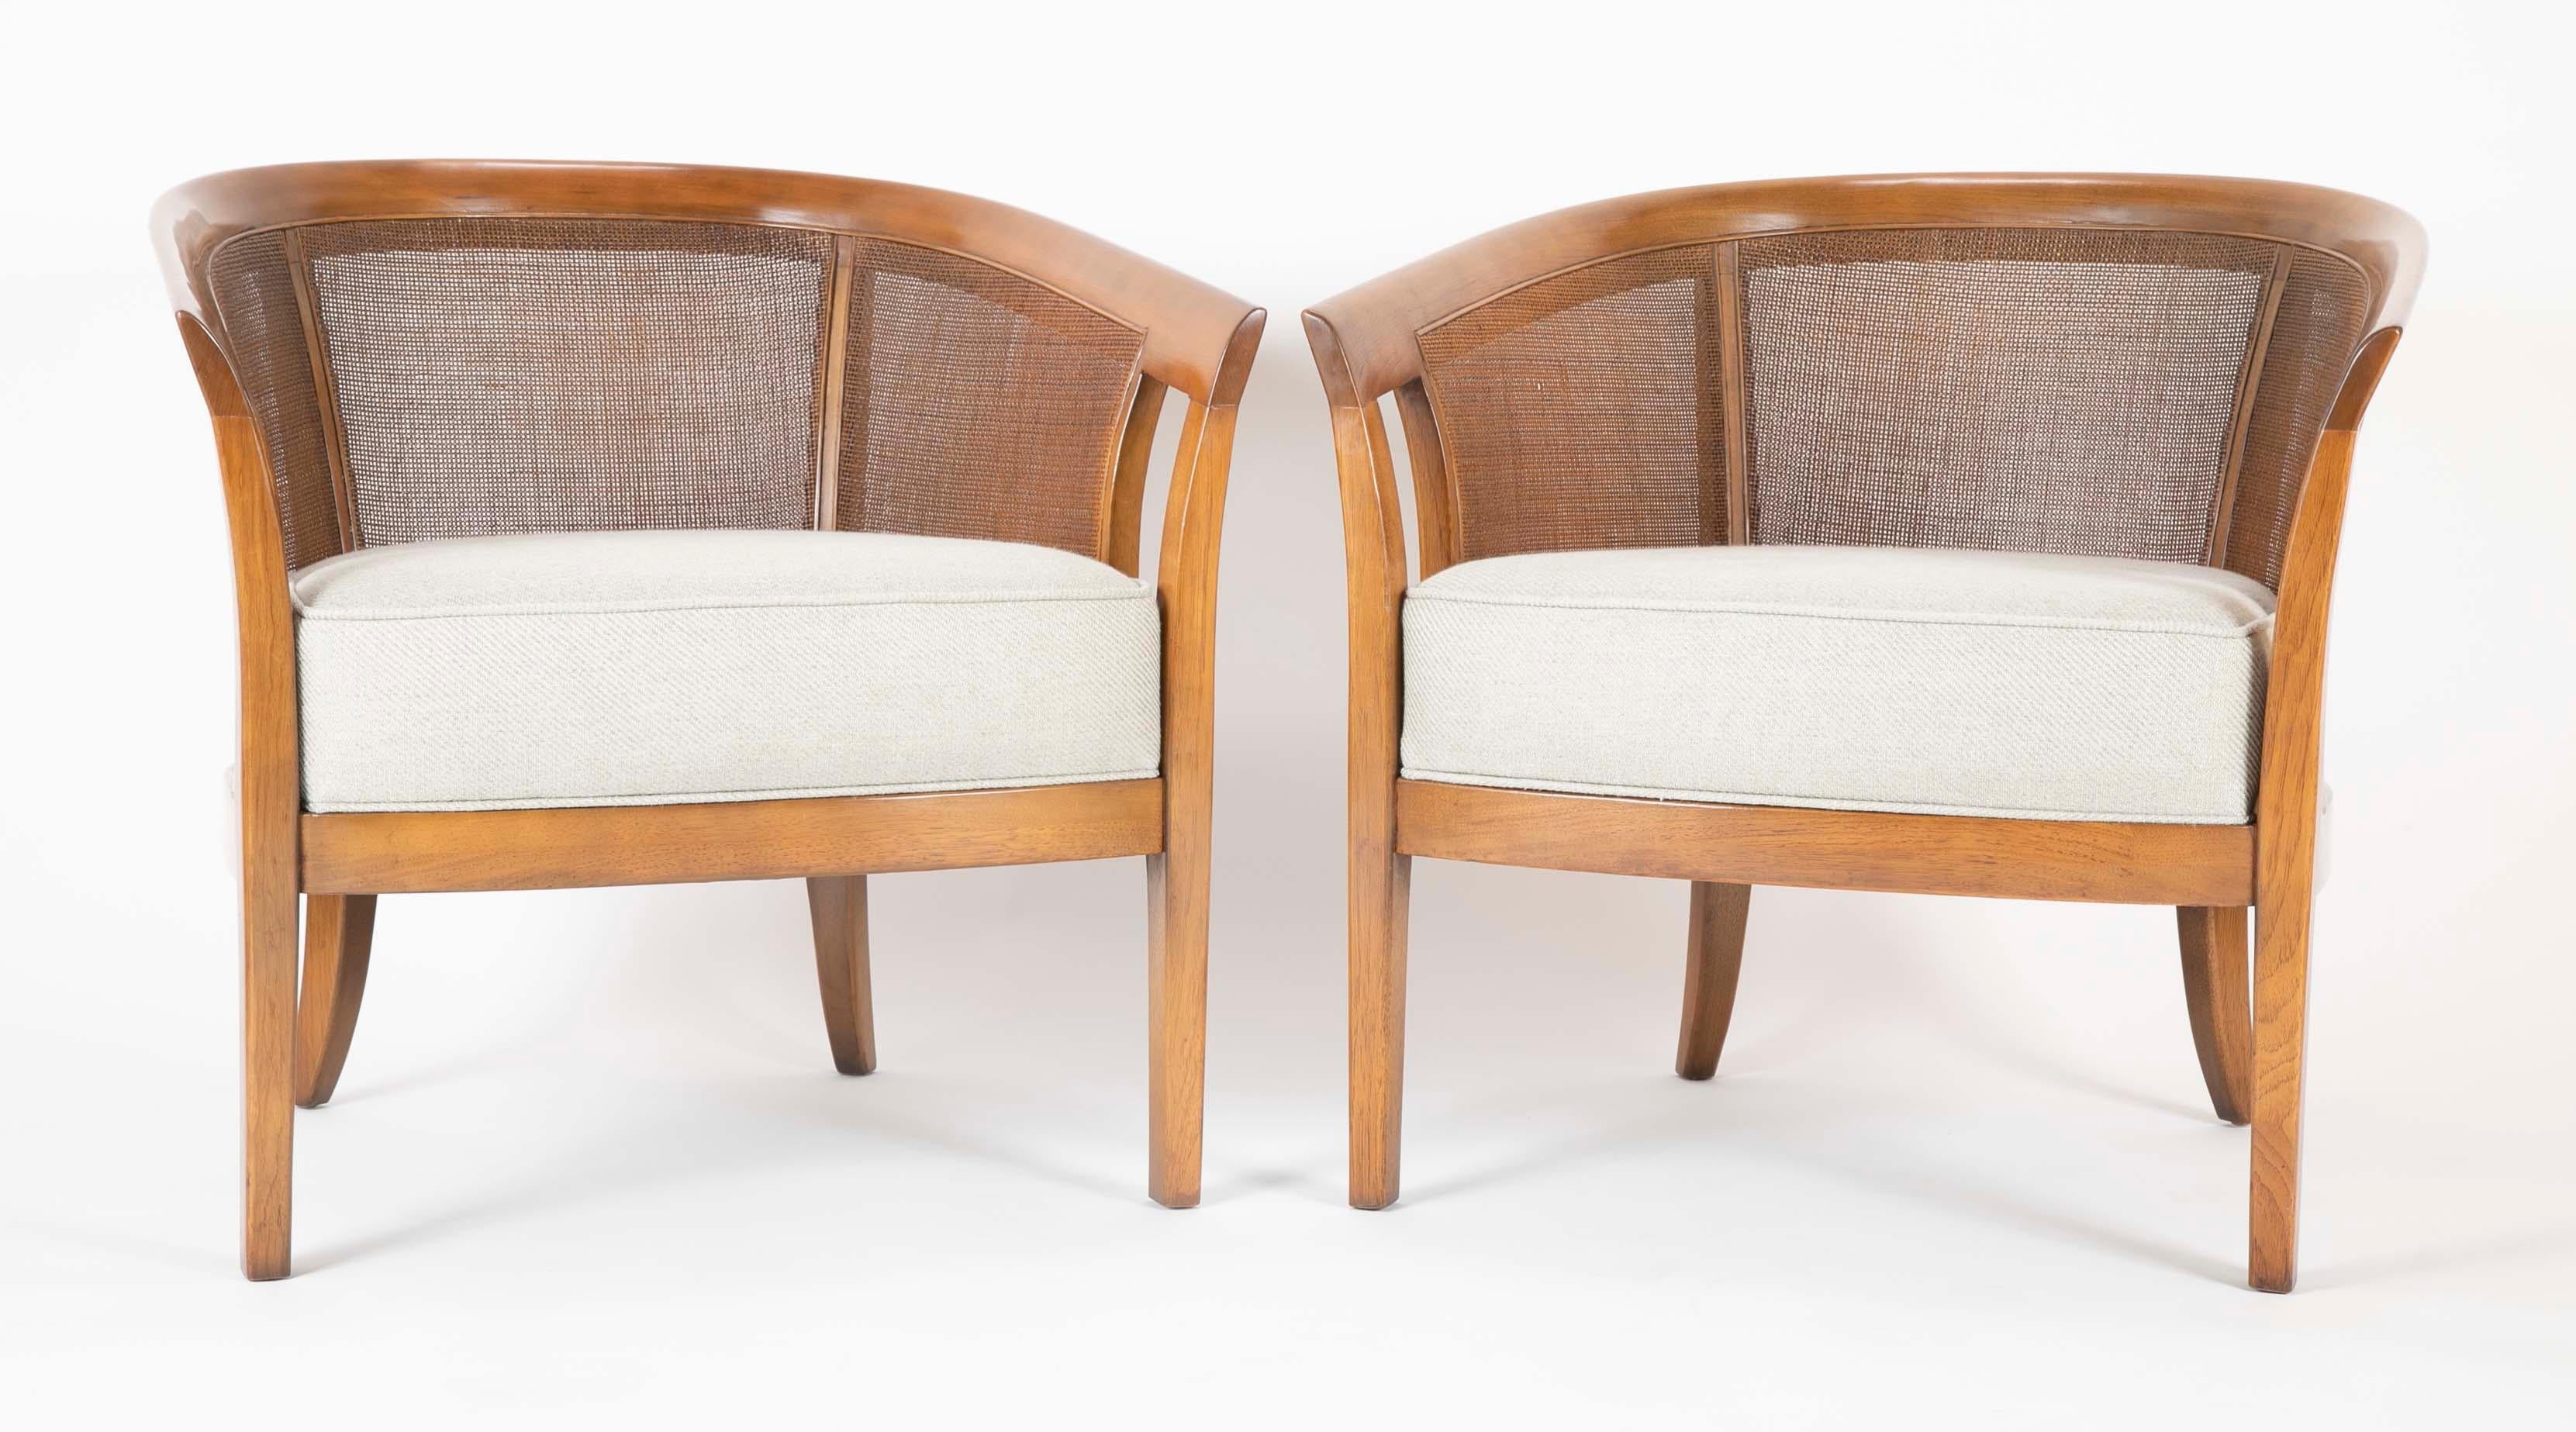 A pair of walnut Edward Wormley designed armchairs produced by Dunbar. Cain sides and backs with Rogers & Gofigon cushions.